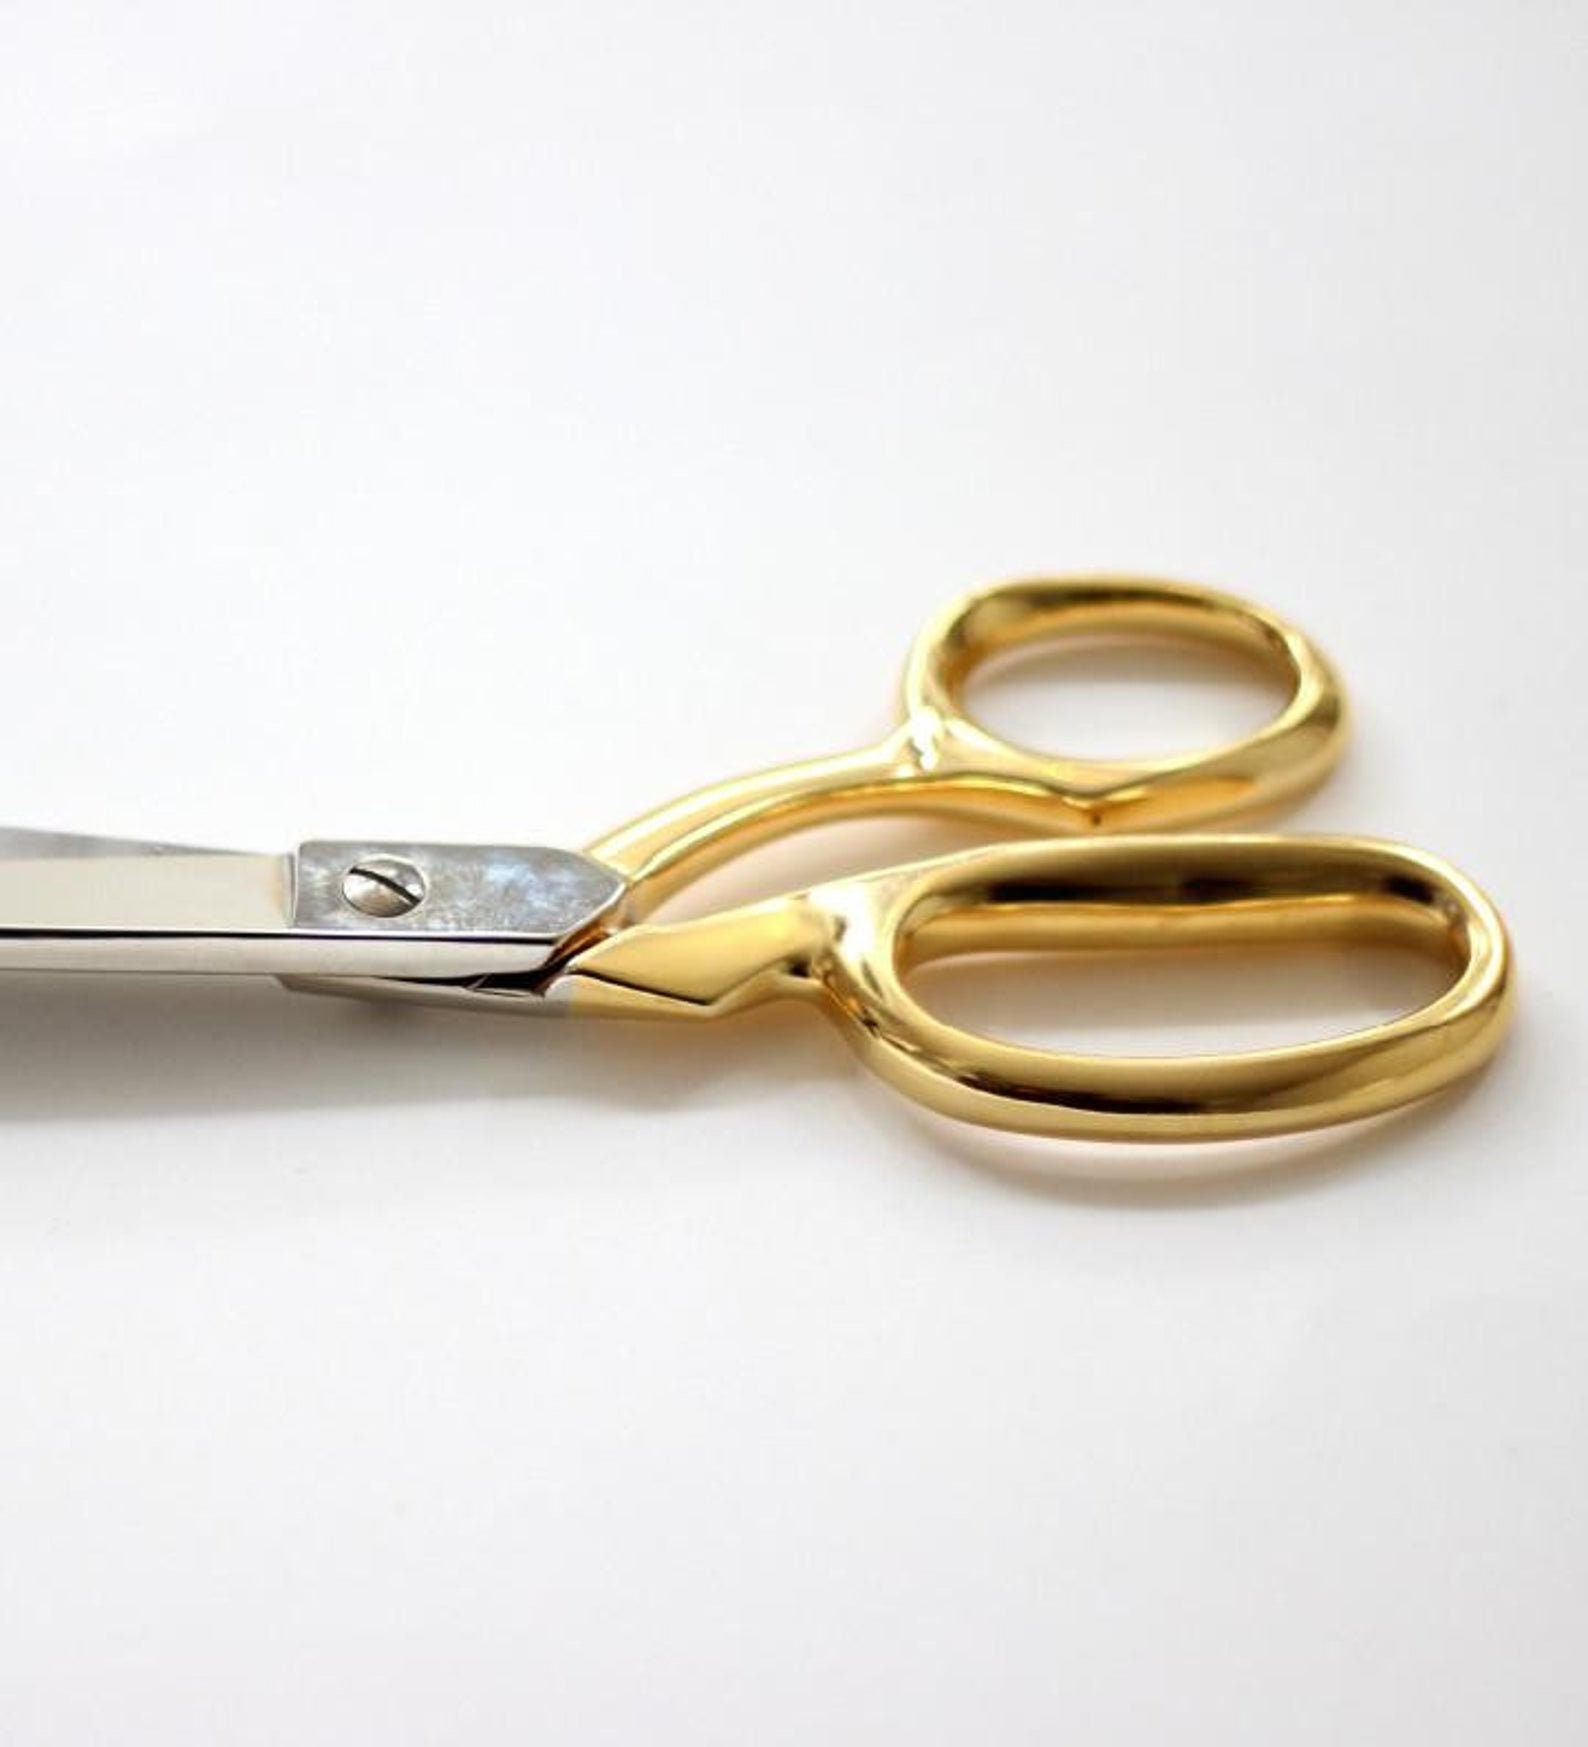 Multi Purpose Fancy Scissors 3 3.5 4 - Gold Plated - Fancy Sewing  Embroidery